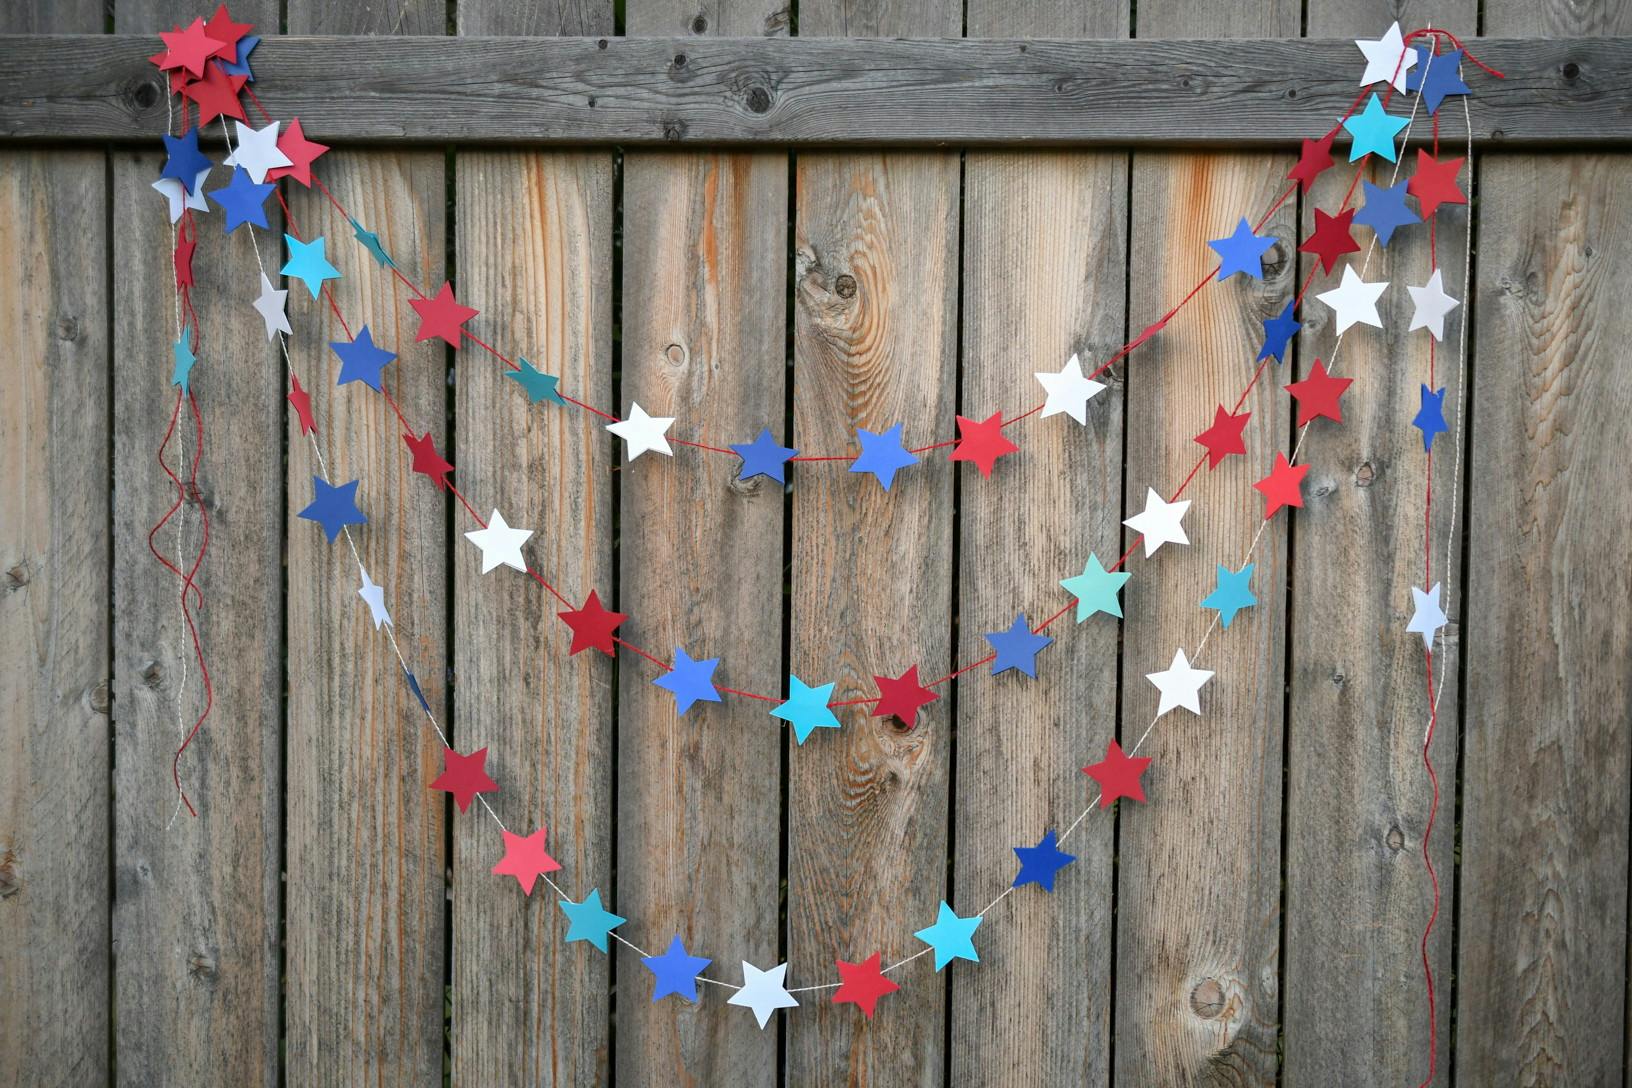 A DIY red, white, and blue star garland hanging from a wooden fence.